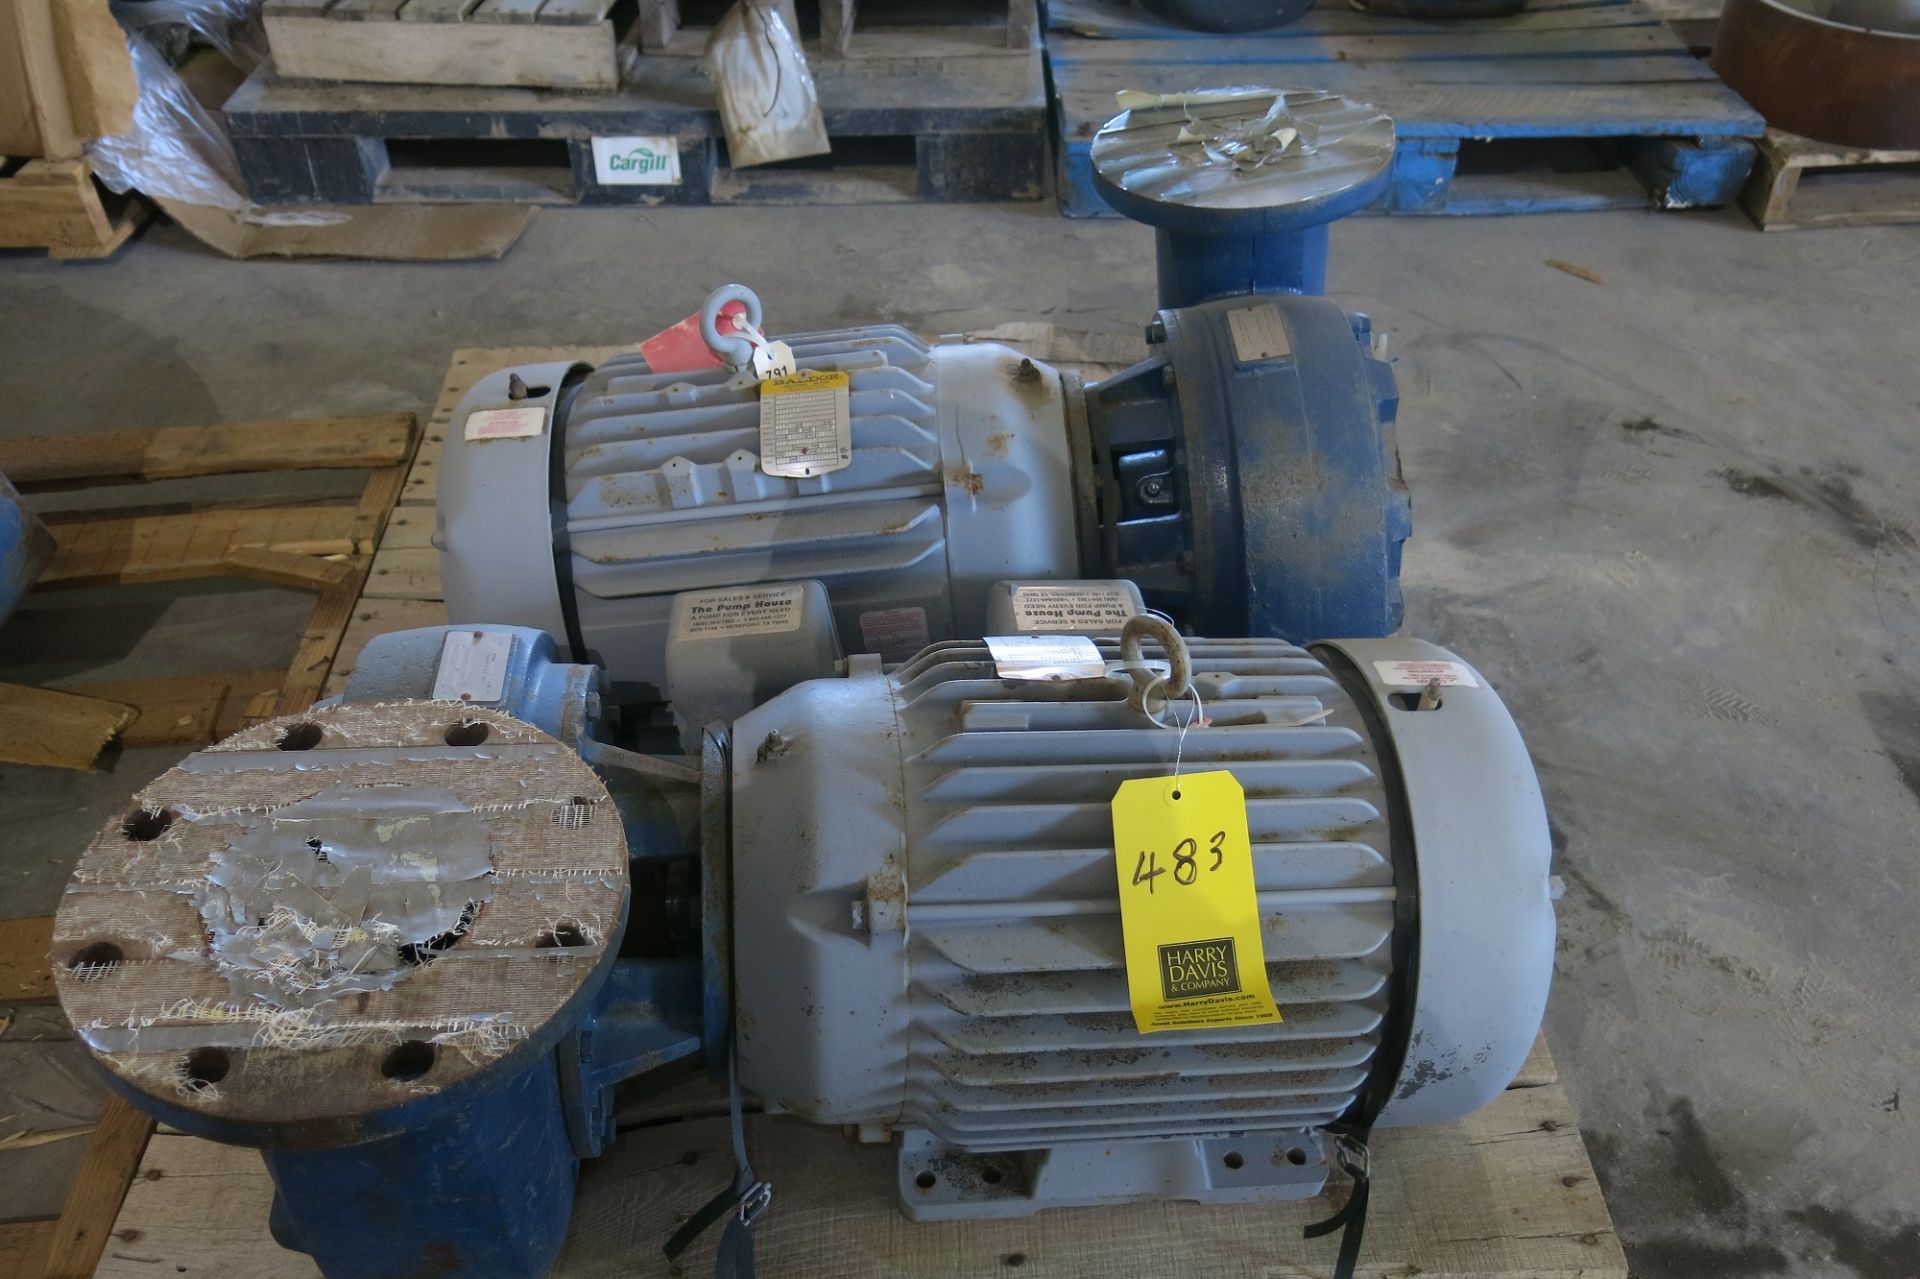 (2) Sterling Fluid System Pumps with Baldor 20 HP Motor, (1) Toshiba 350 HP Motor, (2) Toshiba 25 HP